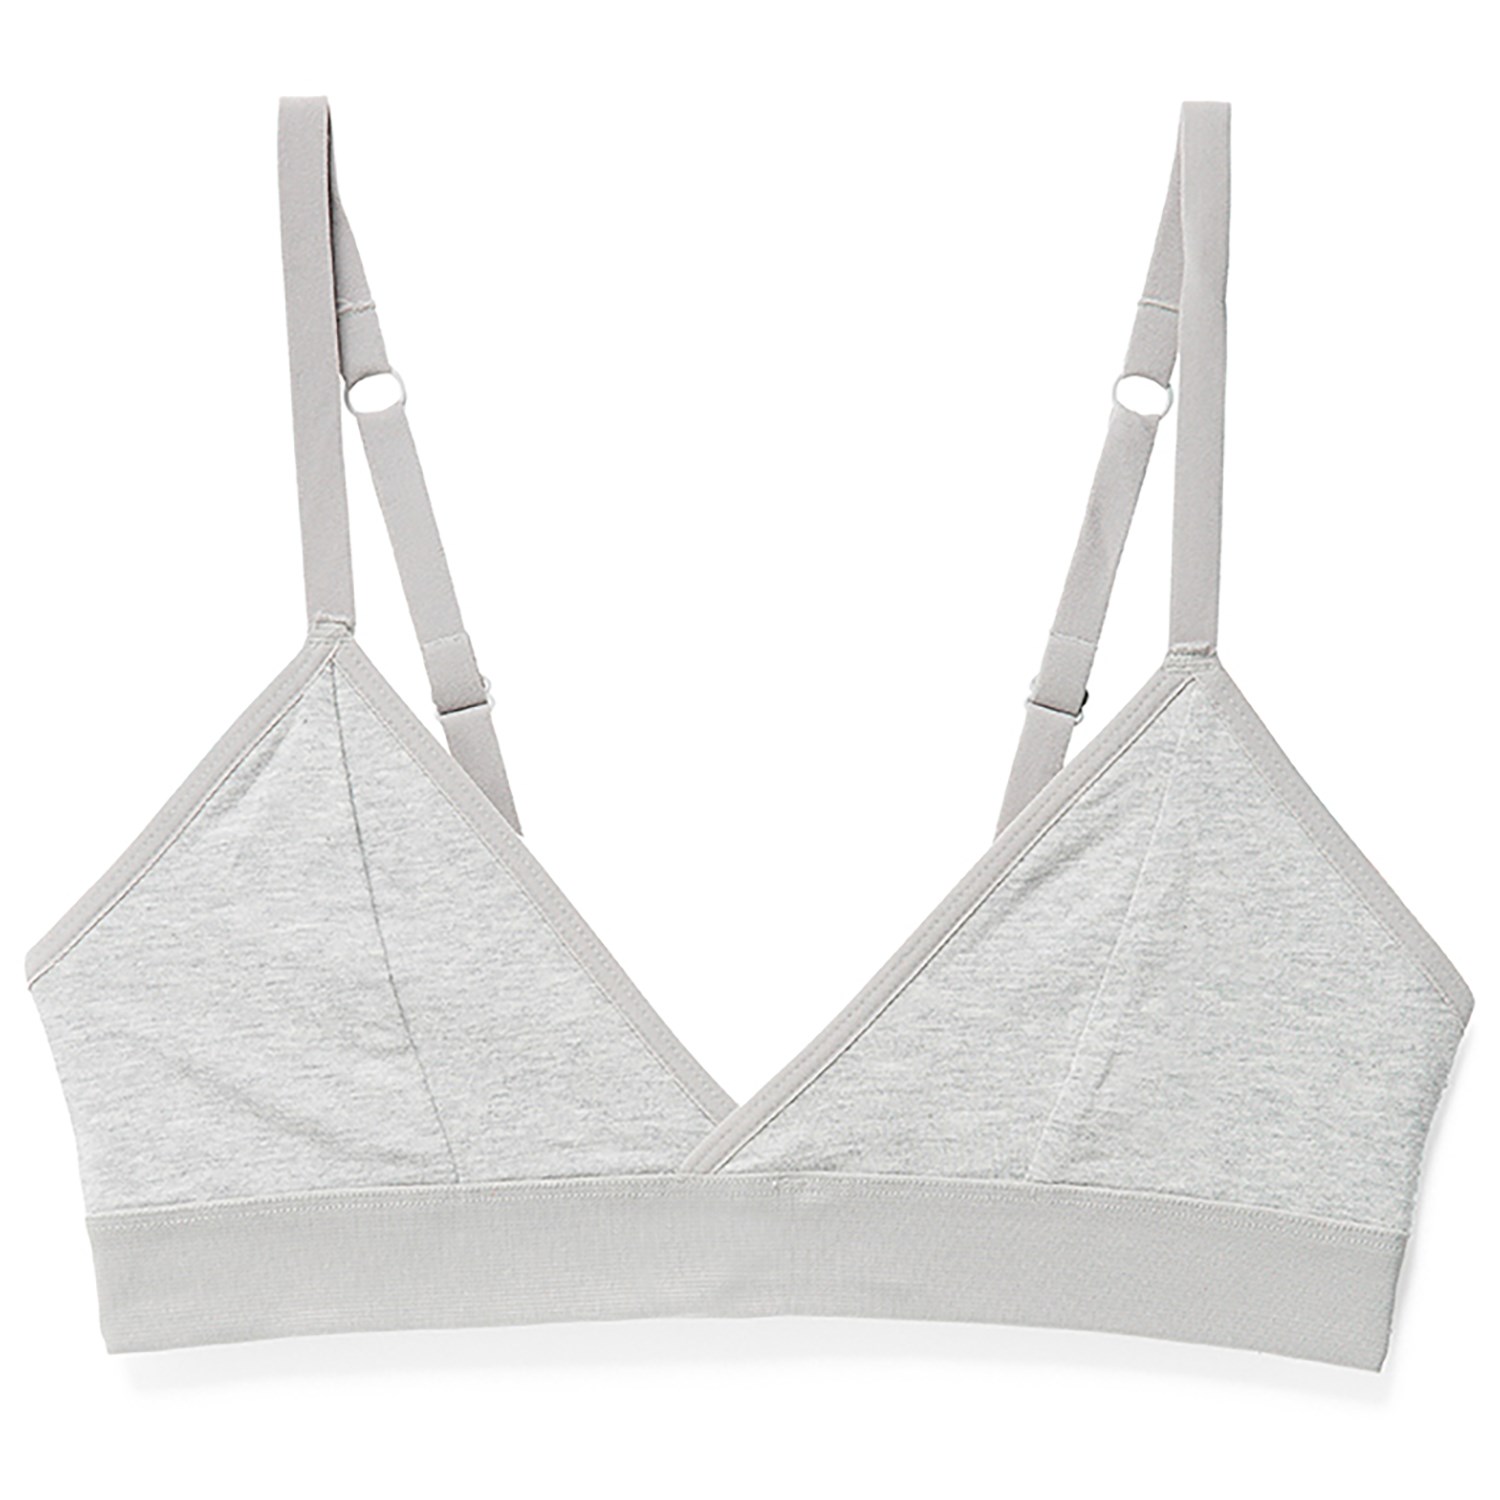 Richer Poorer Classic Bralette in Reflecting Pond – COMMUNION